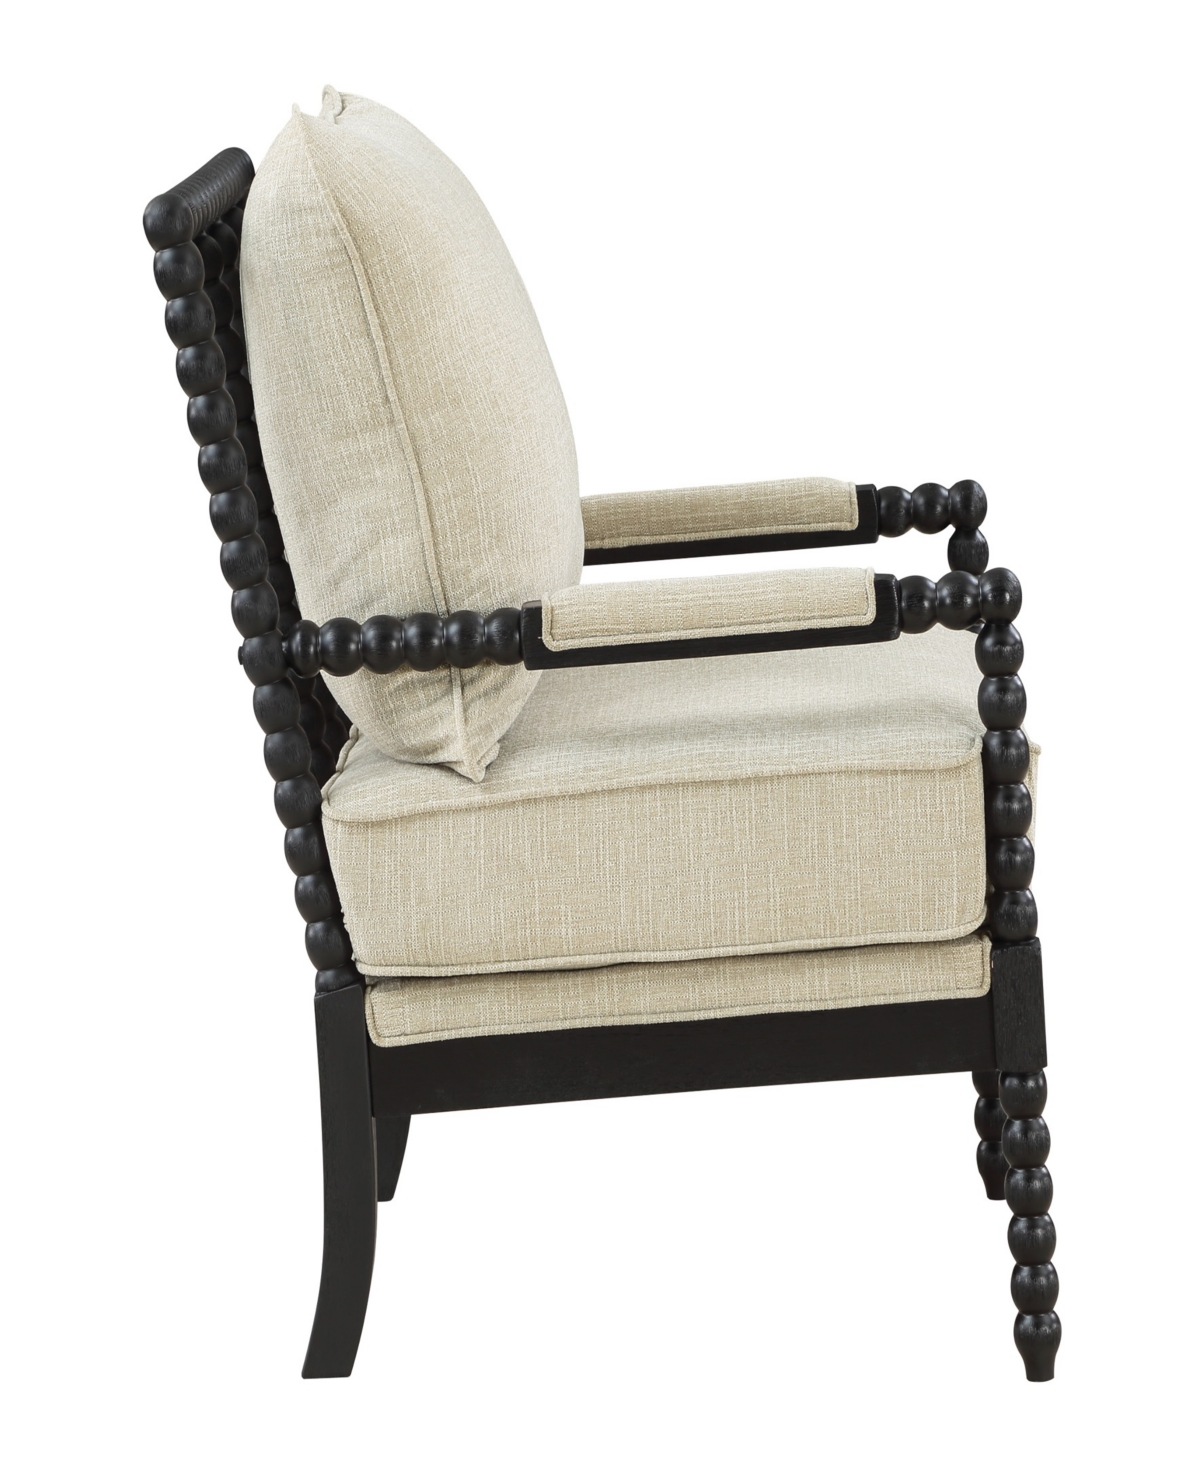 Shop Osp Home Furnishings Office Star Eliza Brown Spindle Chair With Linen Fabric